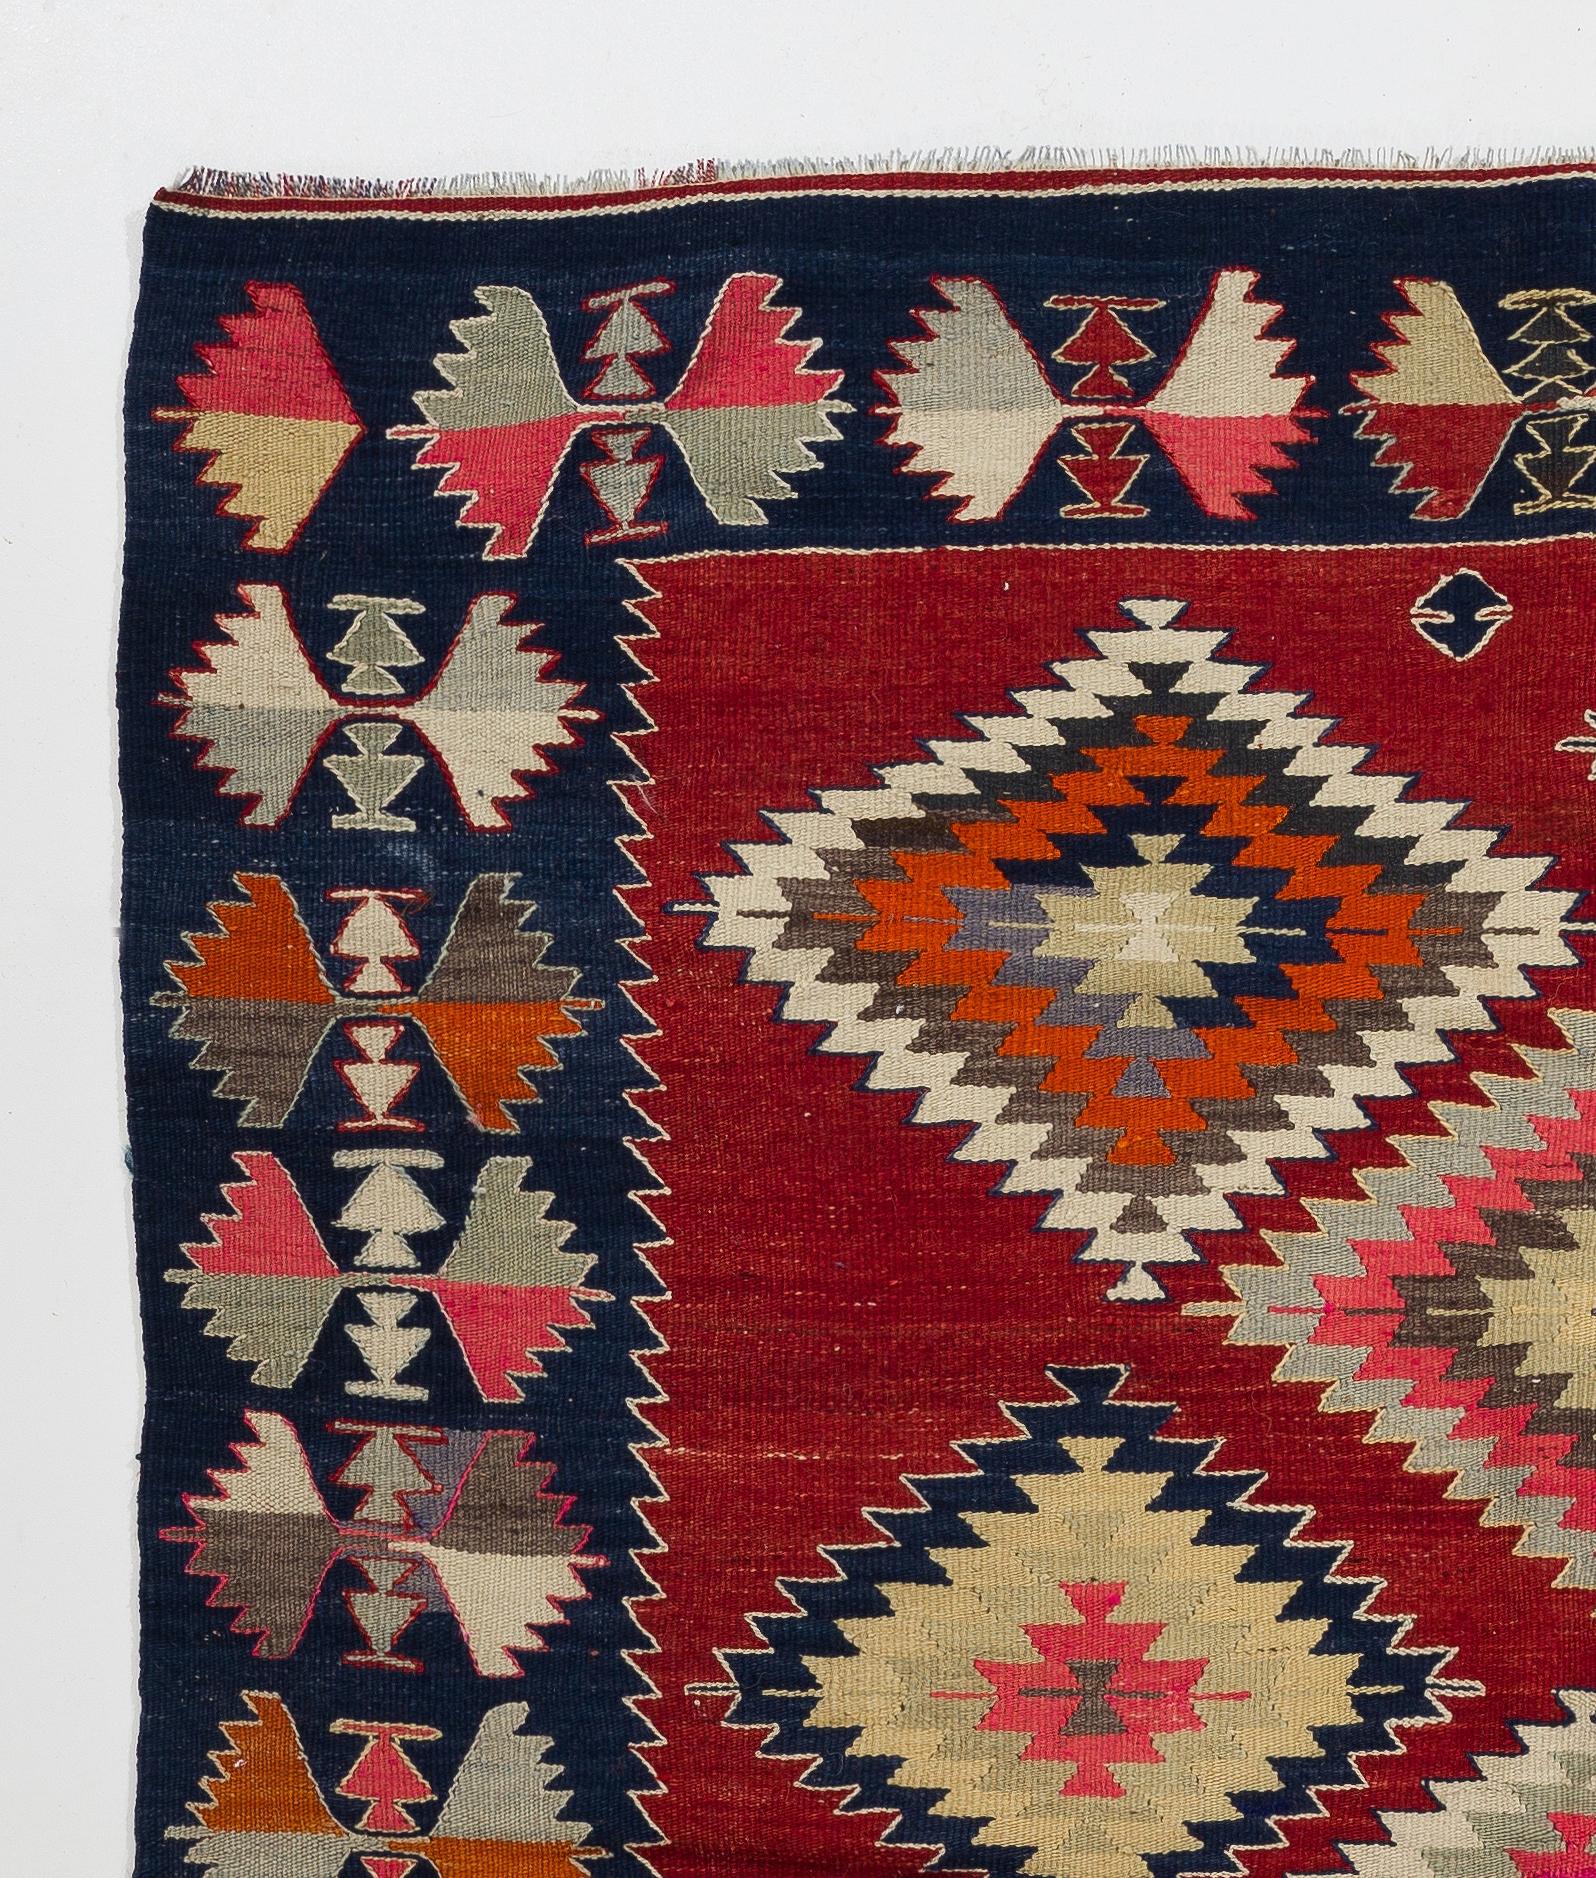 A colorful Turkish Kilim (flat-woven rug) in very good original condition. 100% wool. Measures: 5.8 x 6.8 Ft.

This gorgeous Kilim features stepped diamond patterns nestled within each other, free-floating all-over the field in varying sizes and a